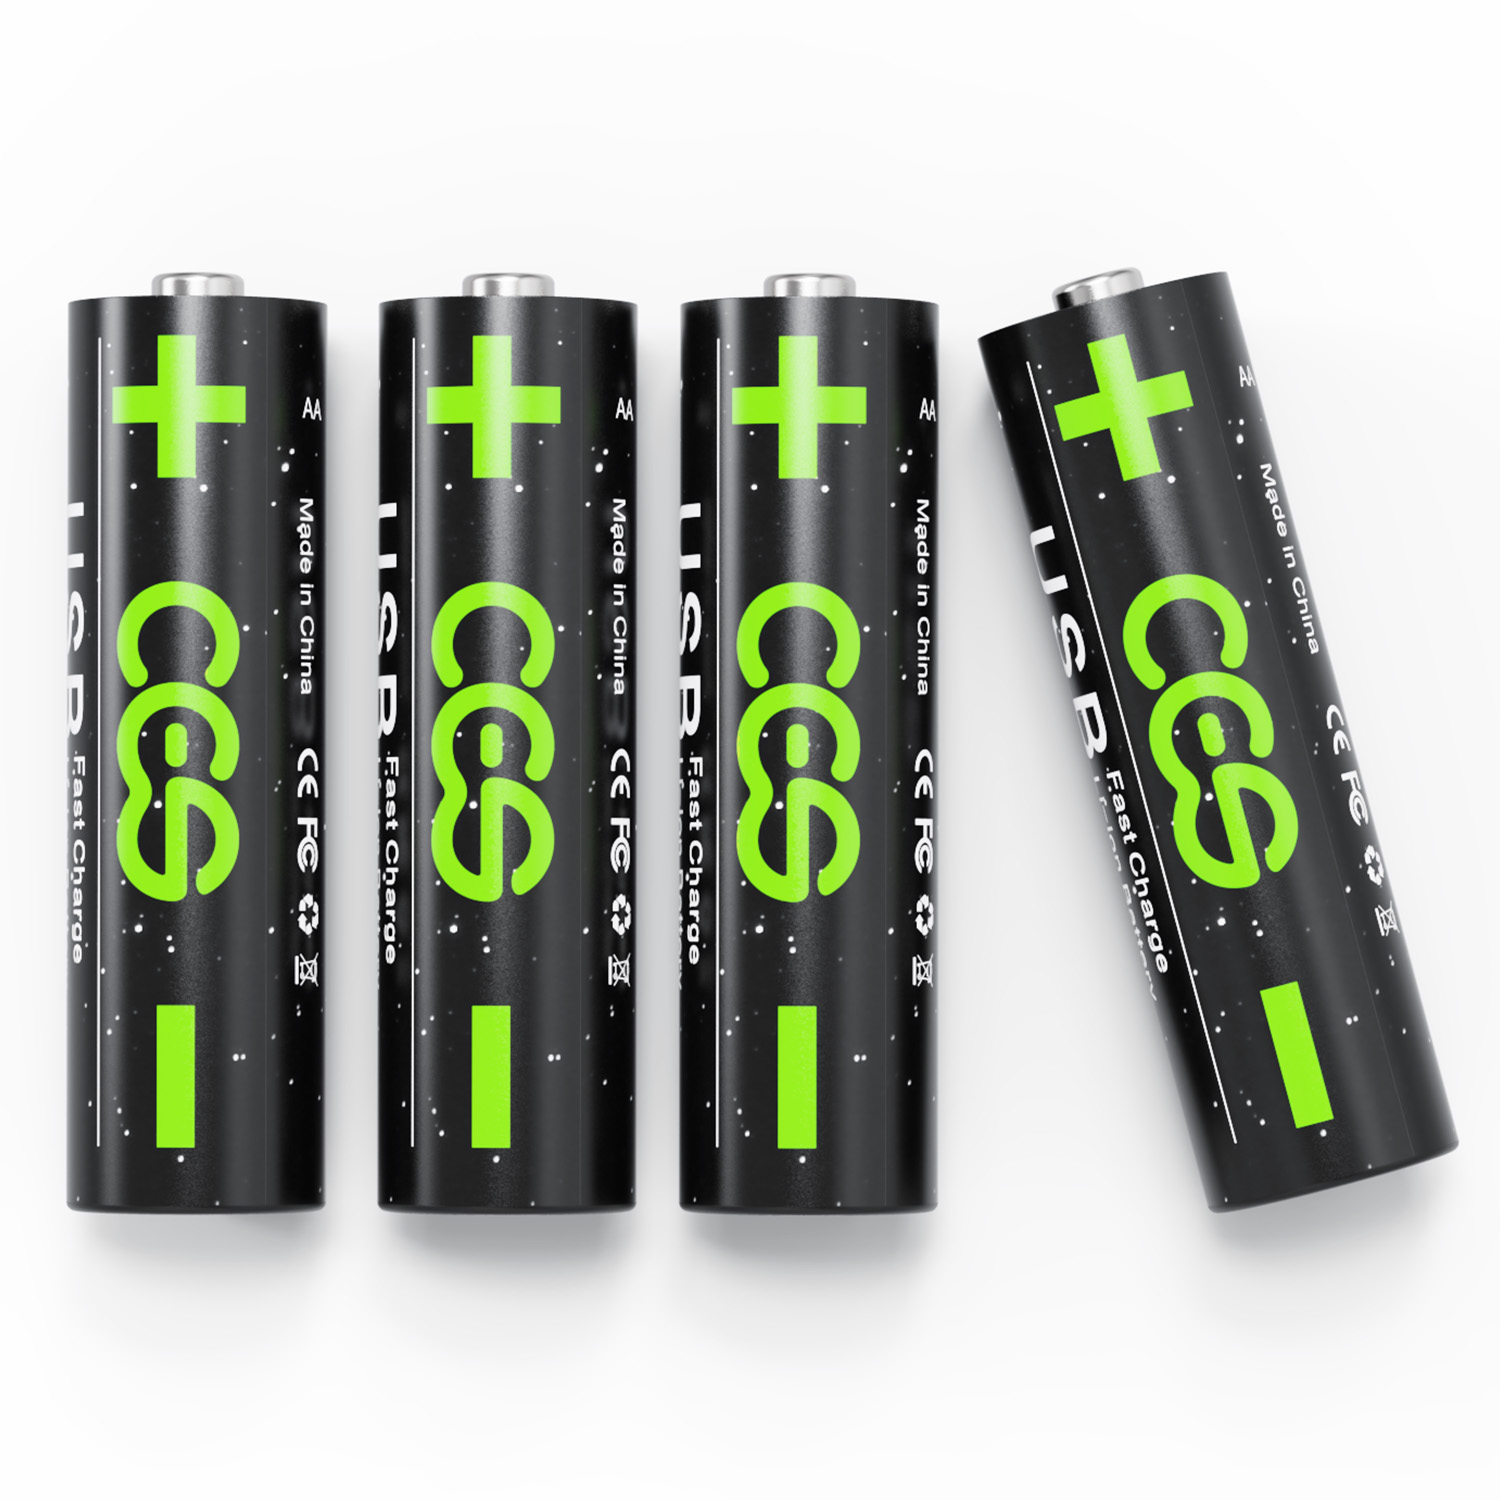 details-ovegna-m502-lightweight-aa-batteries-lithium-ion-non-nimh-non-alkaline-2775-mwh-750-mah-rechargeable-by-usb-input-in-90-minutes-1000-times-charge-indicator-for-your-daily-needs--87